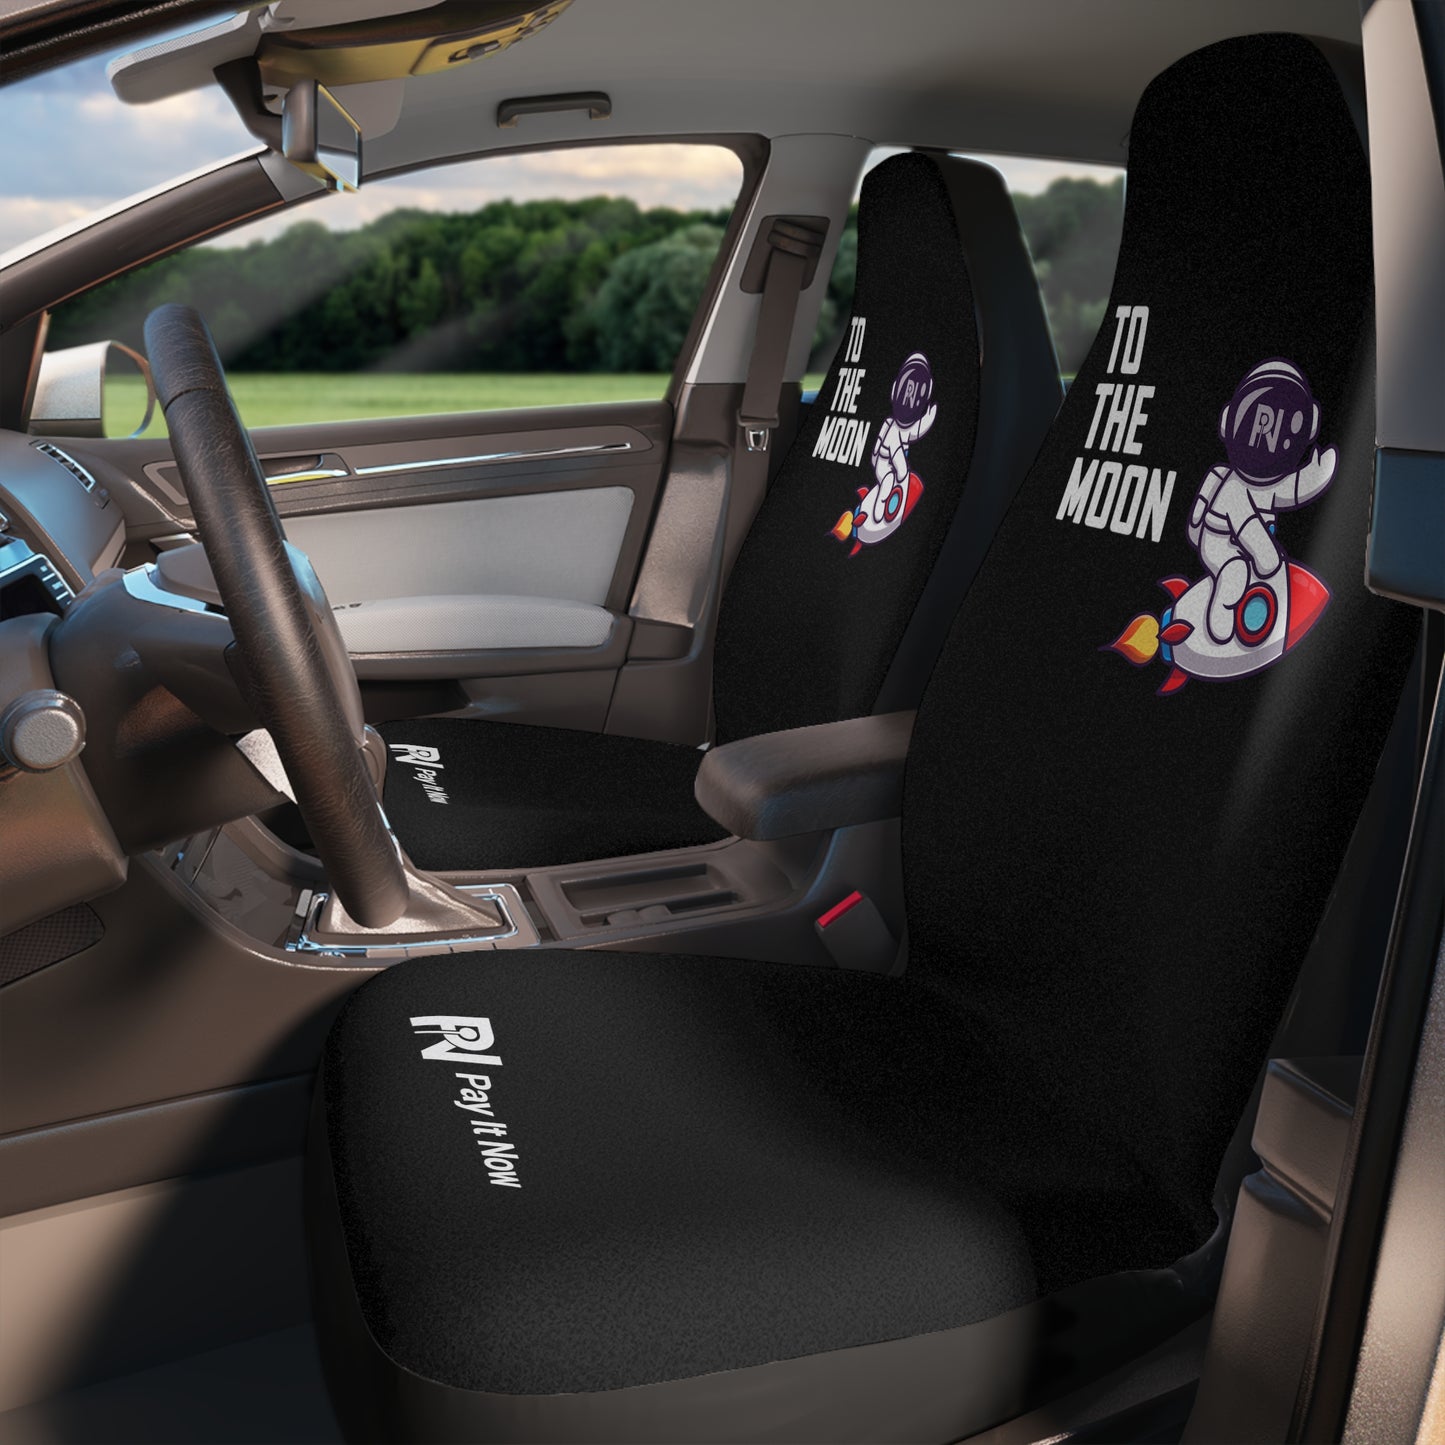 Car Seat Covers (To the moon)